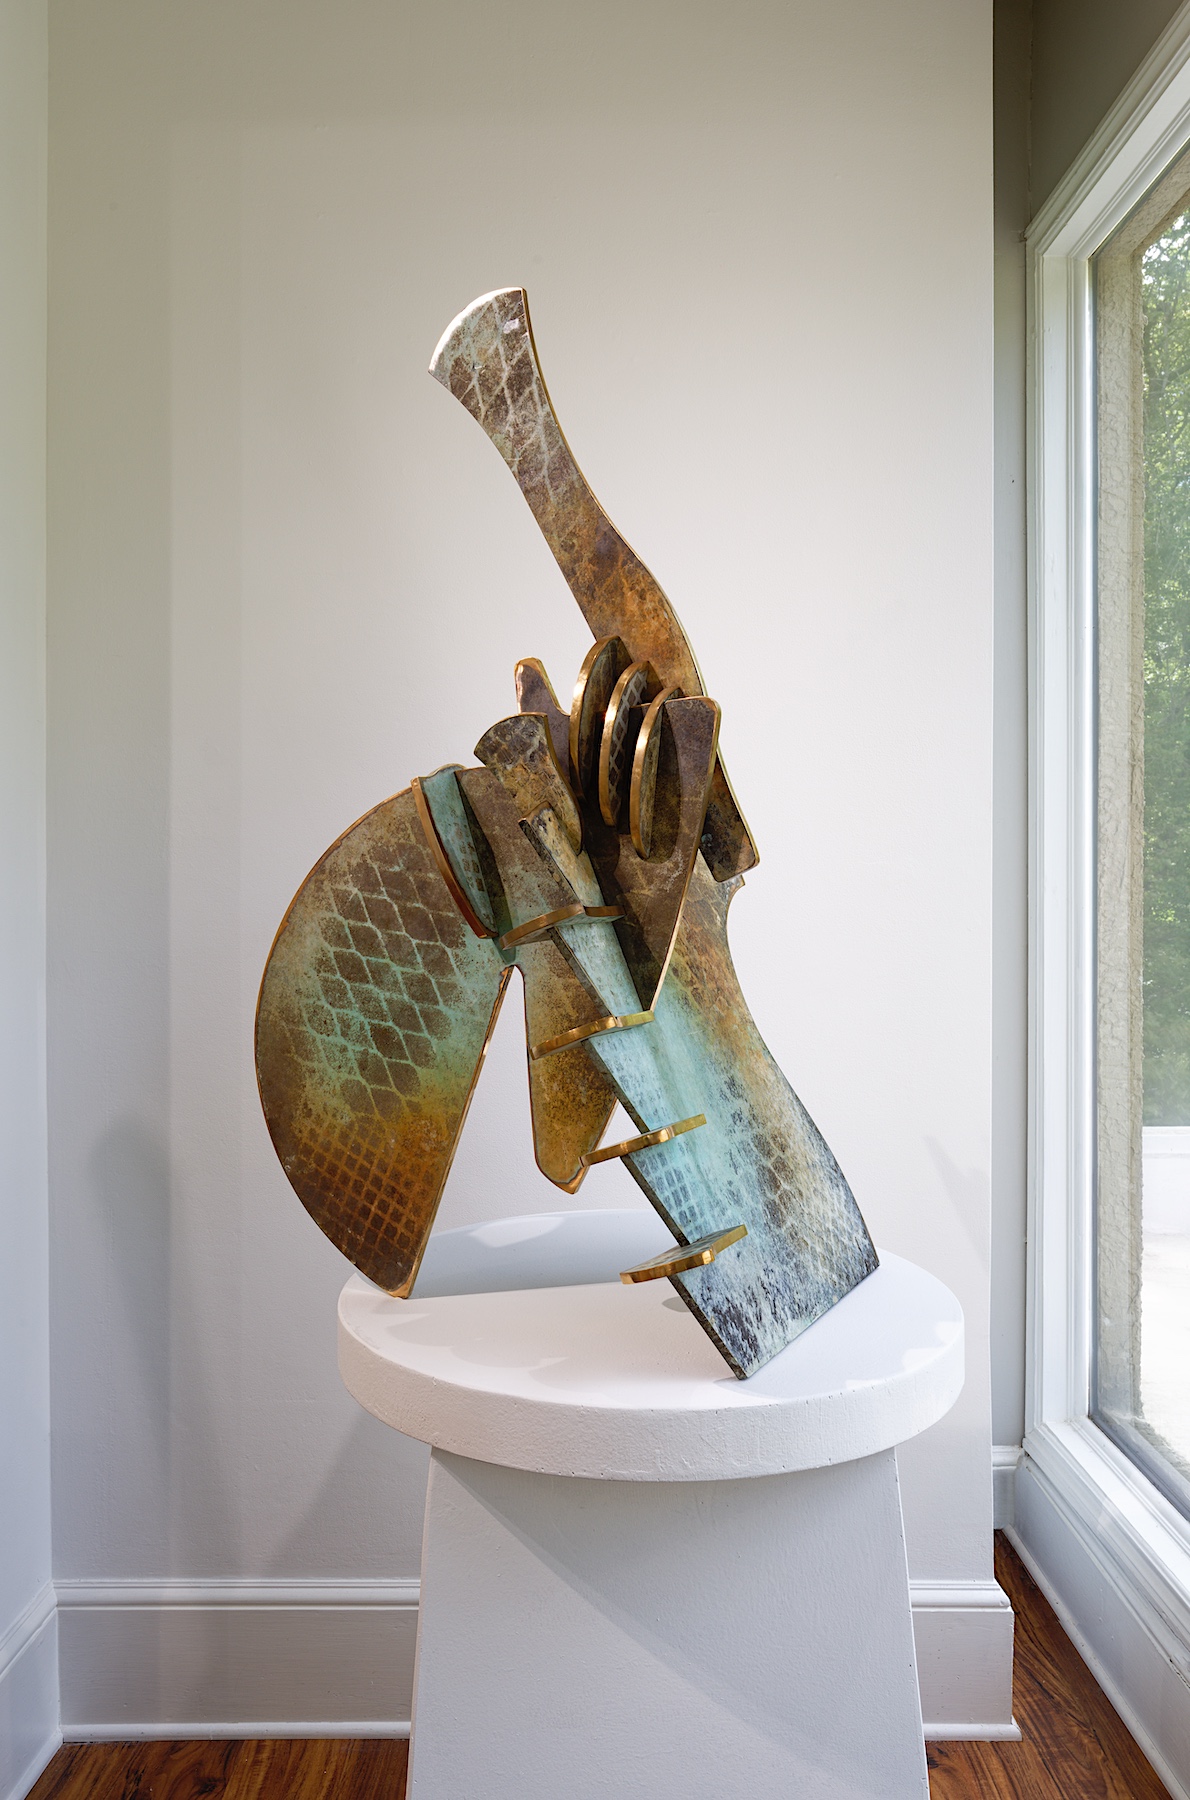 A green and gold patina'd bronze sculpture rests atop a white pedestal in the gallery.